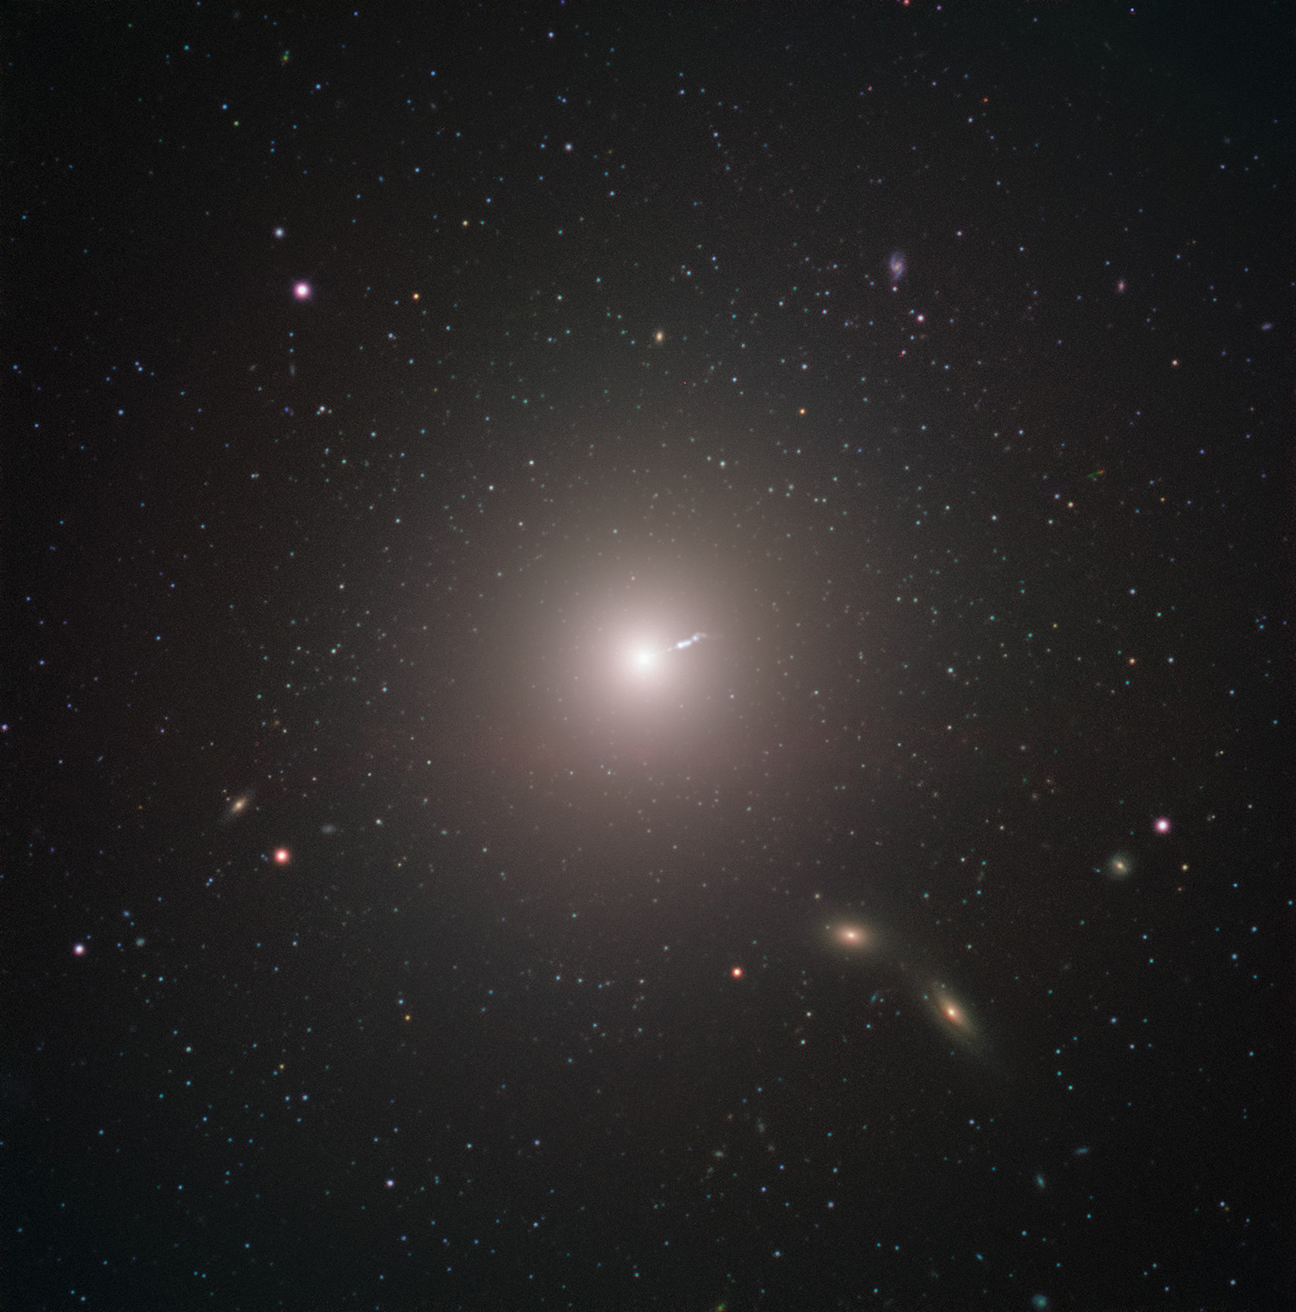 The supermassive black hole imaged by the EHT is located in the center of the elliptical galaxy M87, located about 55 million light years from Earth. This image was captured by FORS2 on ESO's Very Large Telescope. The short linear feature near the center of the image is a jet produced by the black hole.